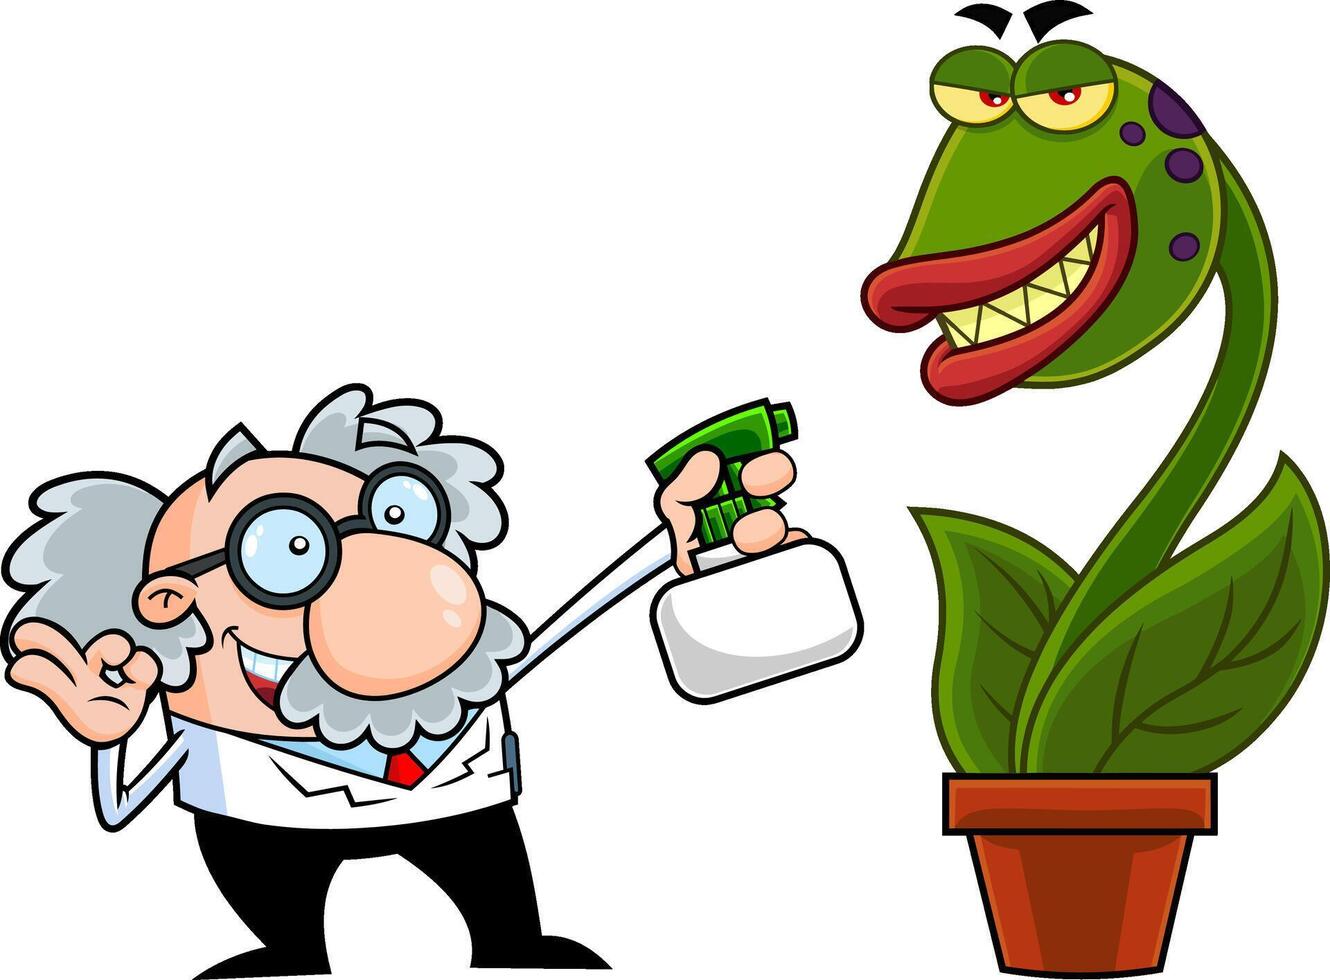 Science Professor Cartoon Character Spraying Evil Carnivorous Plant. Vector Hand Drawn Illustration Isolated On Transparent Background